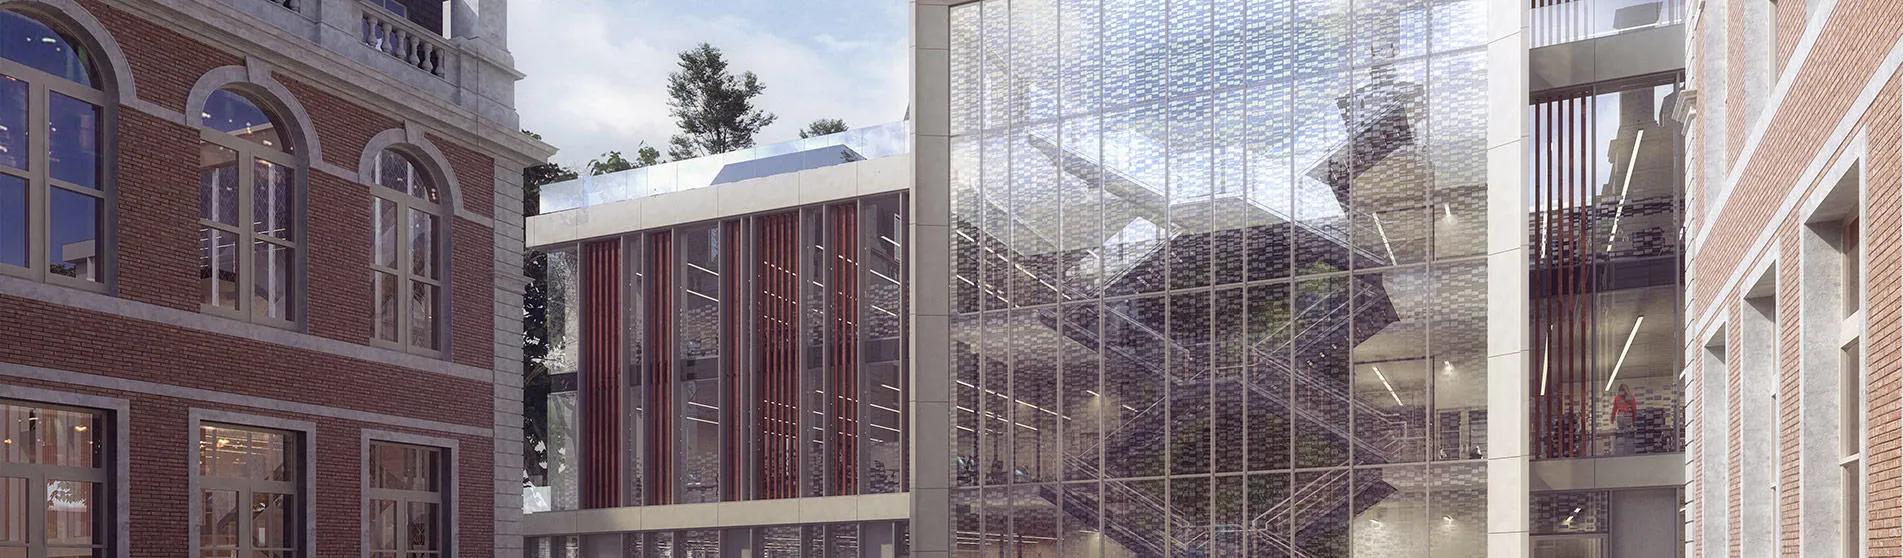 An artist's impression of the London Institute for Healthcare Engineering (LIHE).